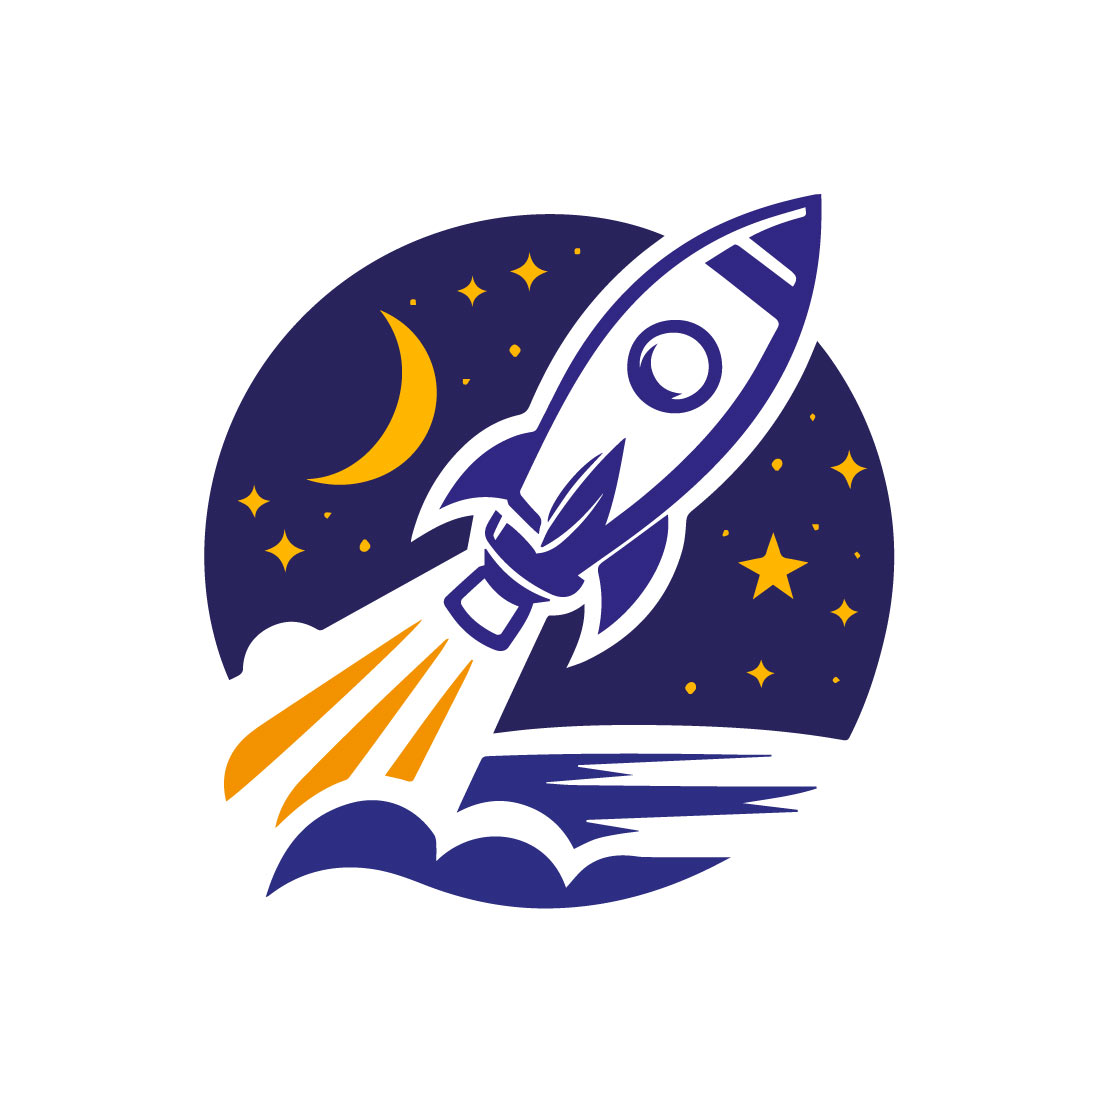 Rocket Launching vector for t-shirt preview image.